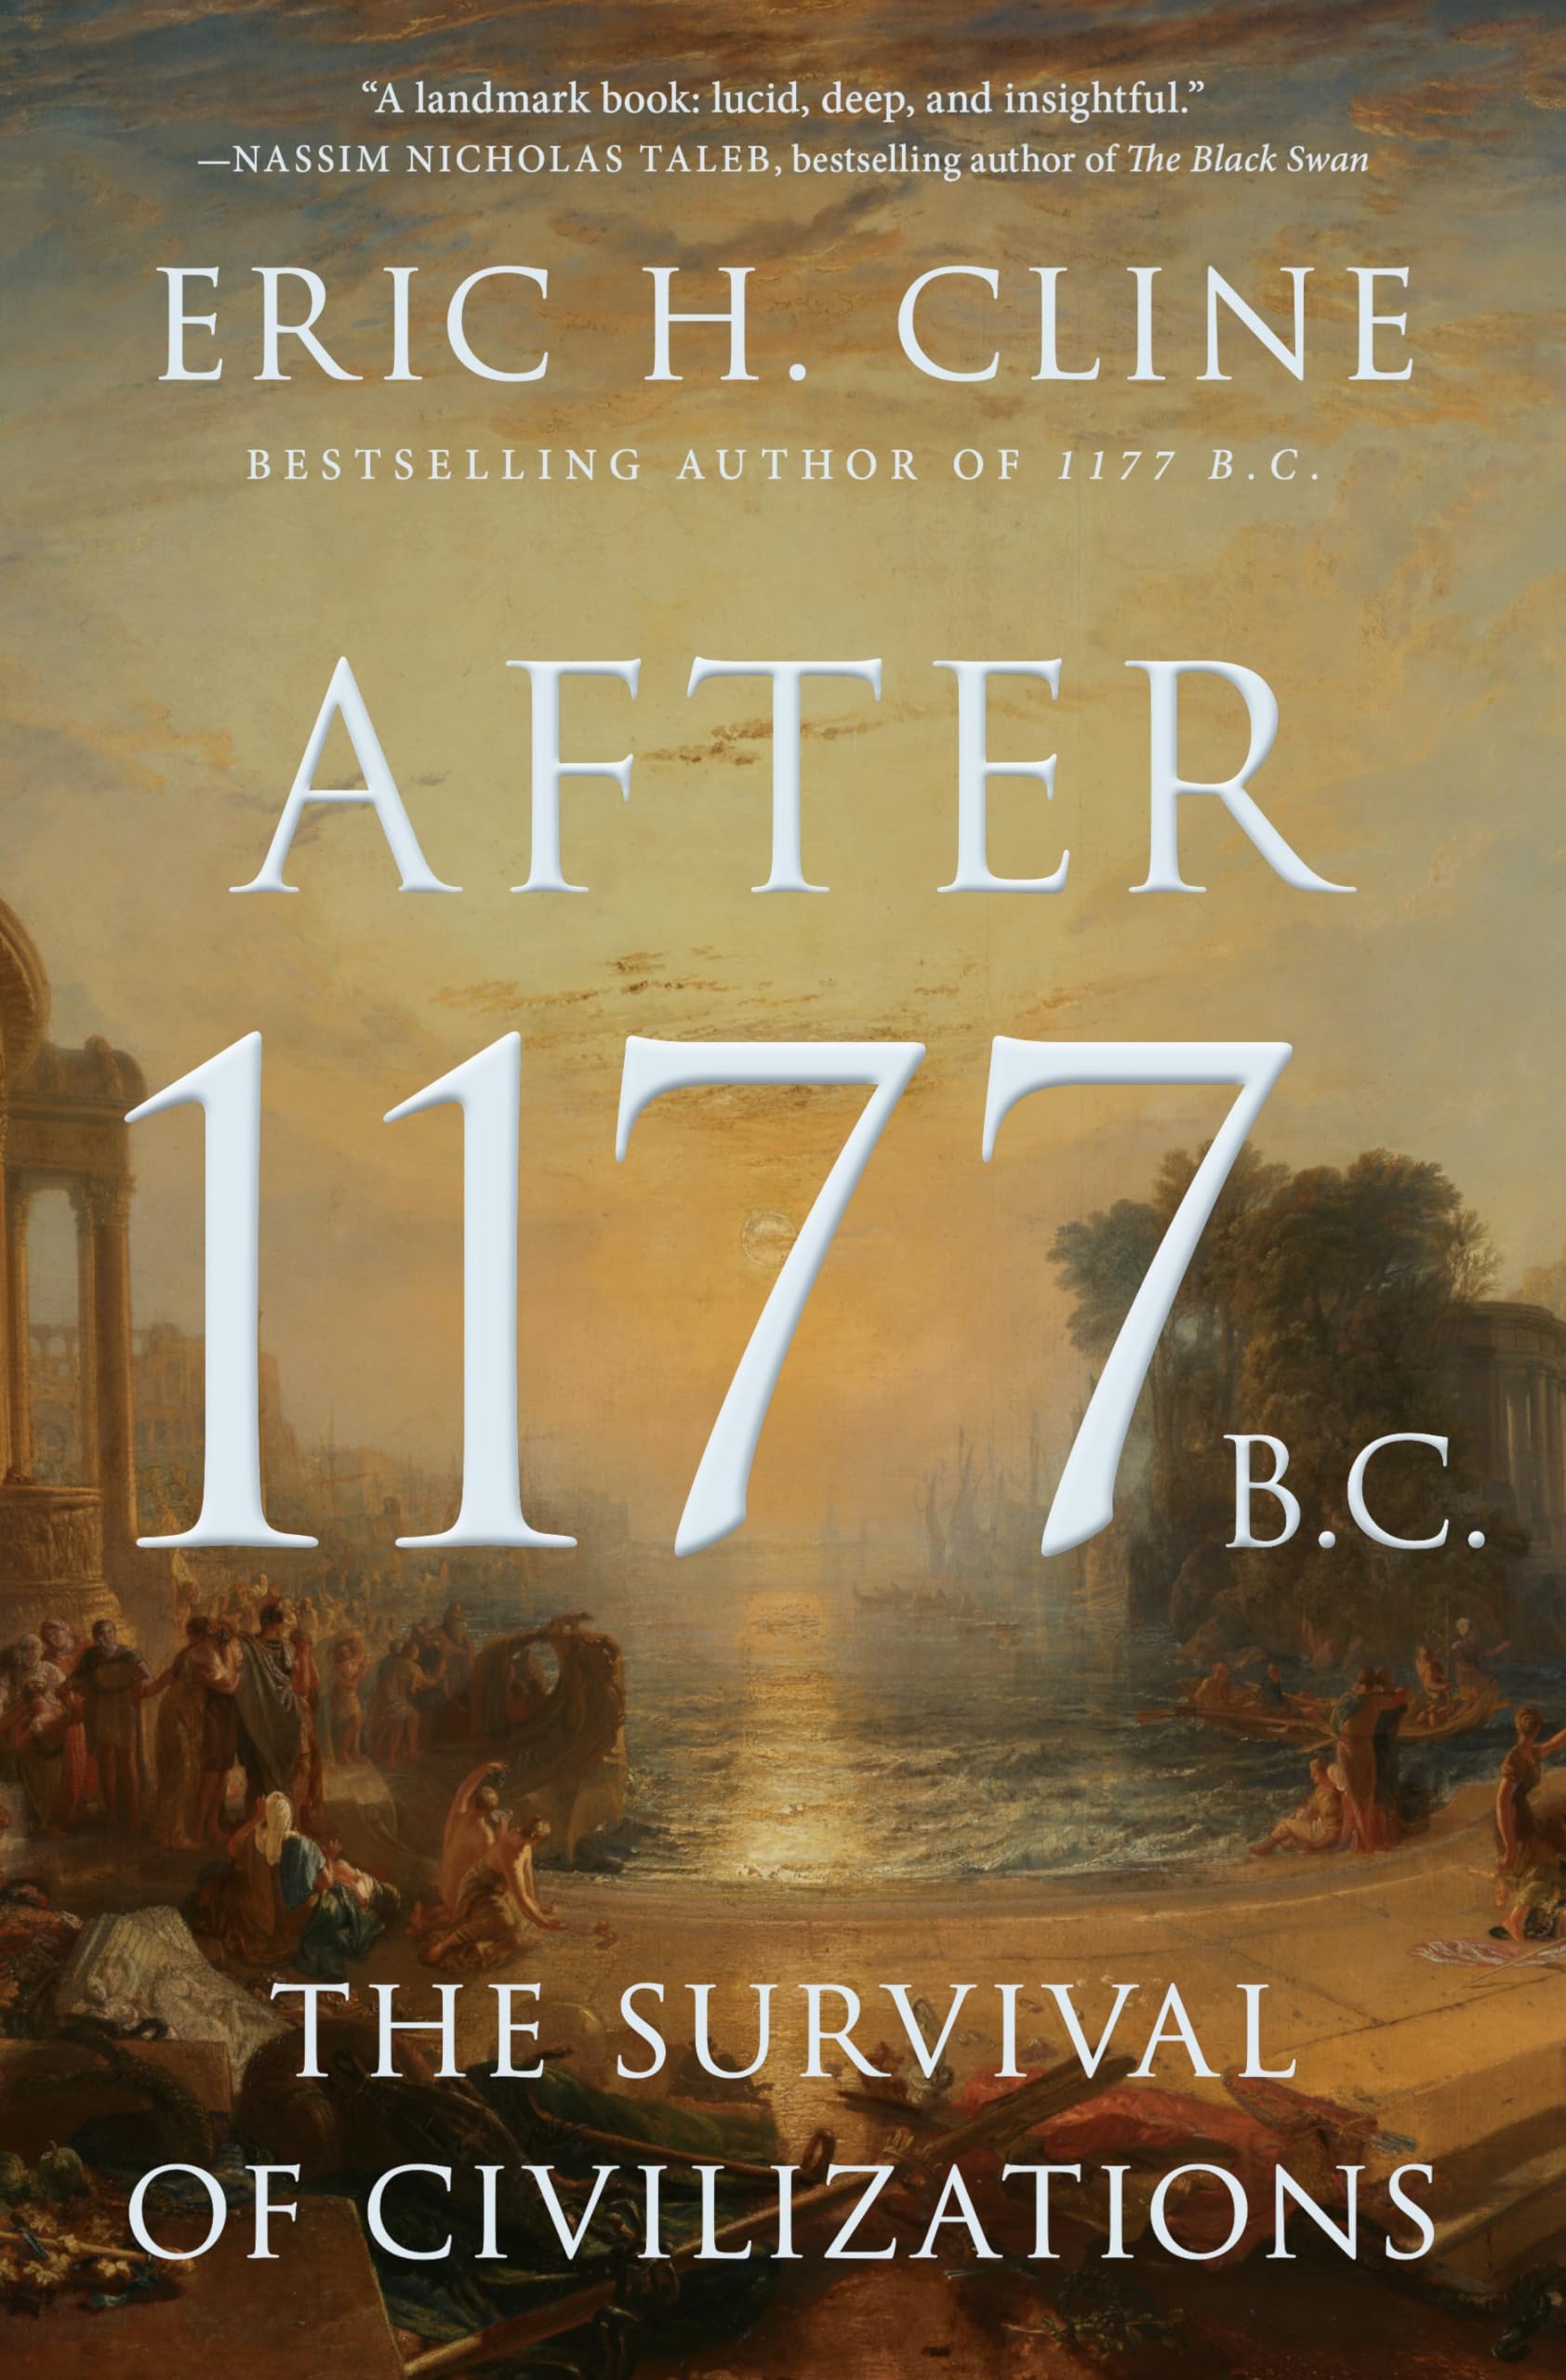 After 1177 B.C.: The Survival of Civilizations by Cline, Eric H.